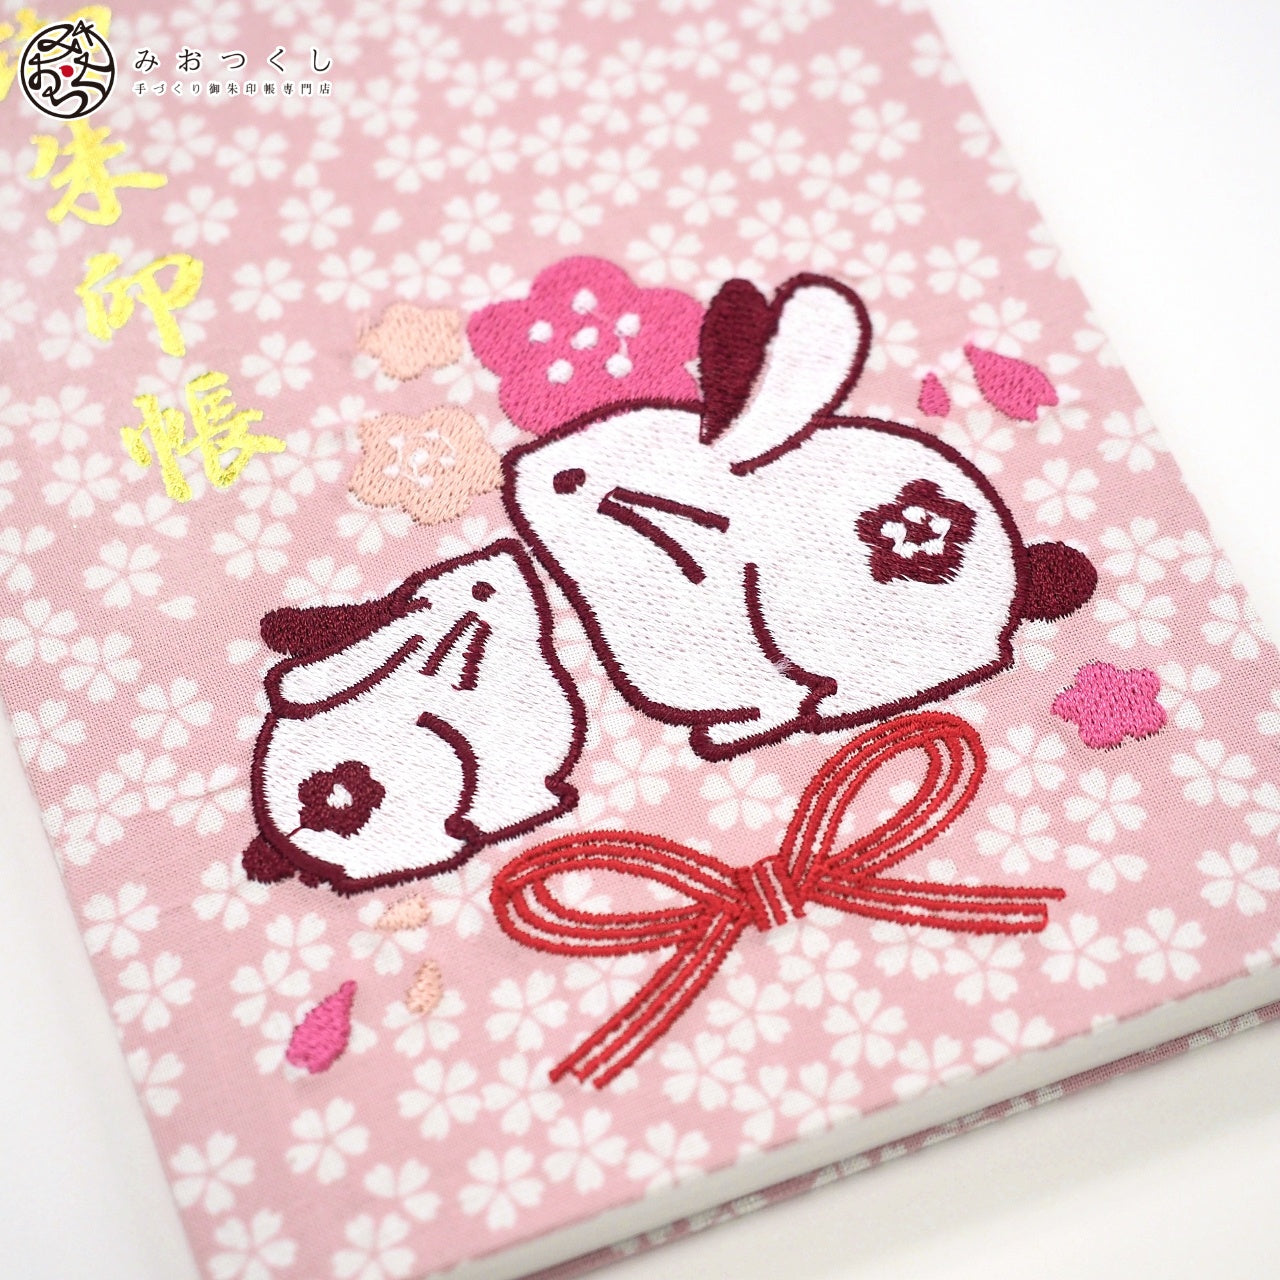 Goshuin book "Limited quantity" embroidery goshuin book/Rabbit (cherry blossoms)